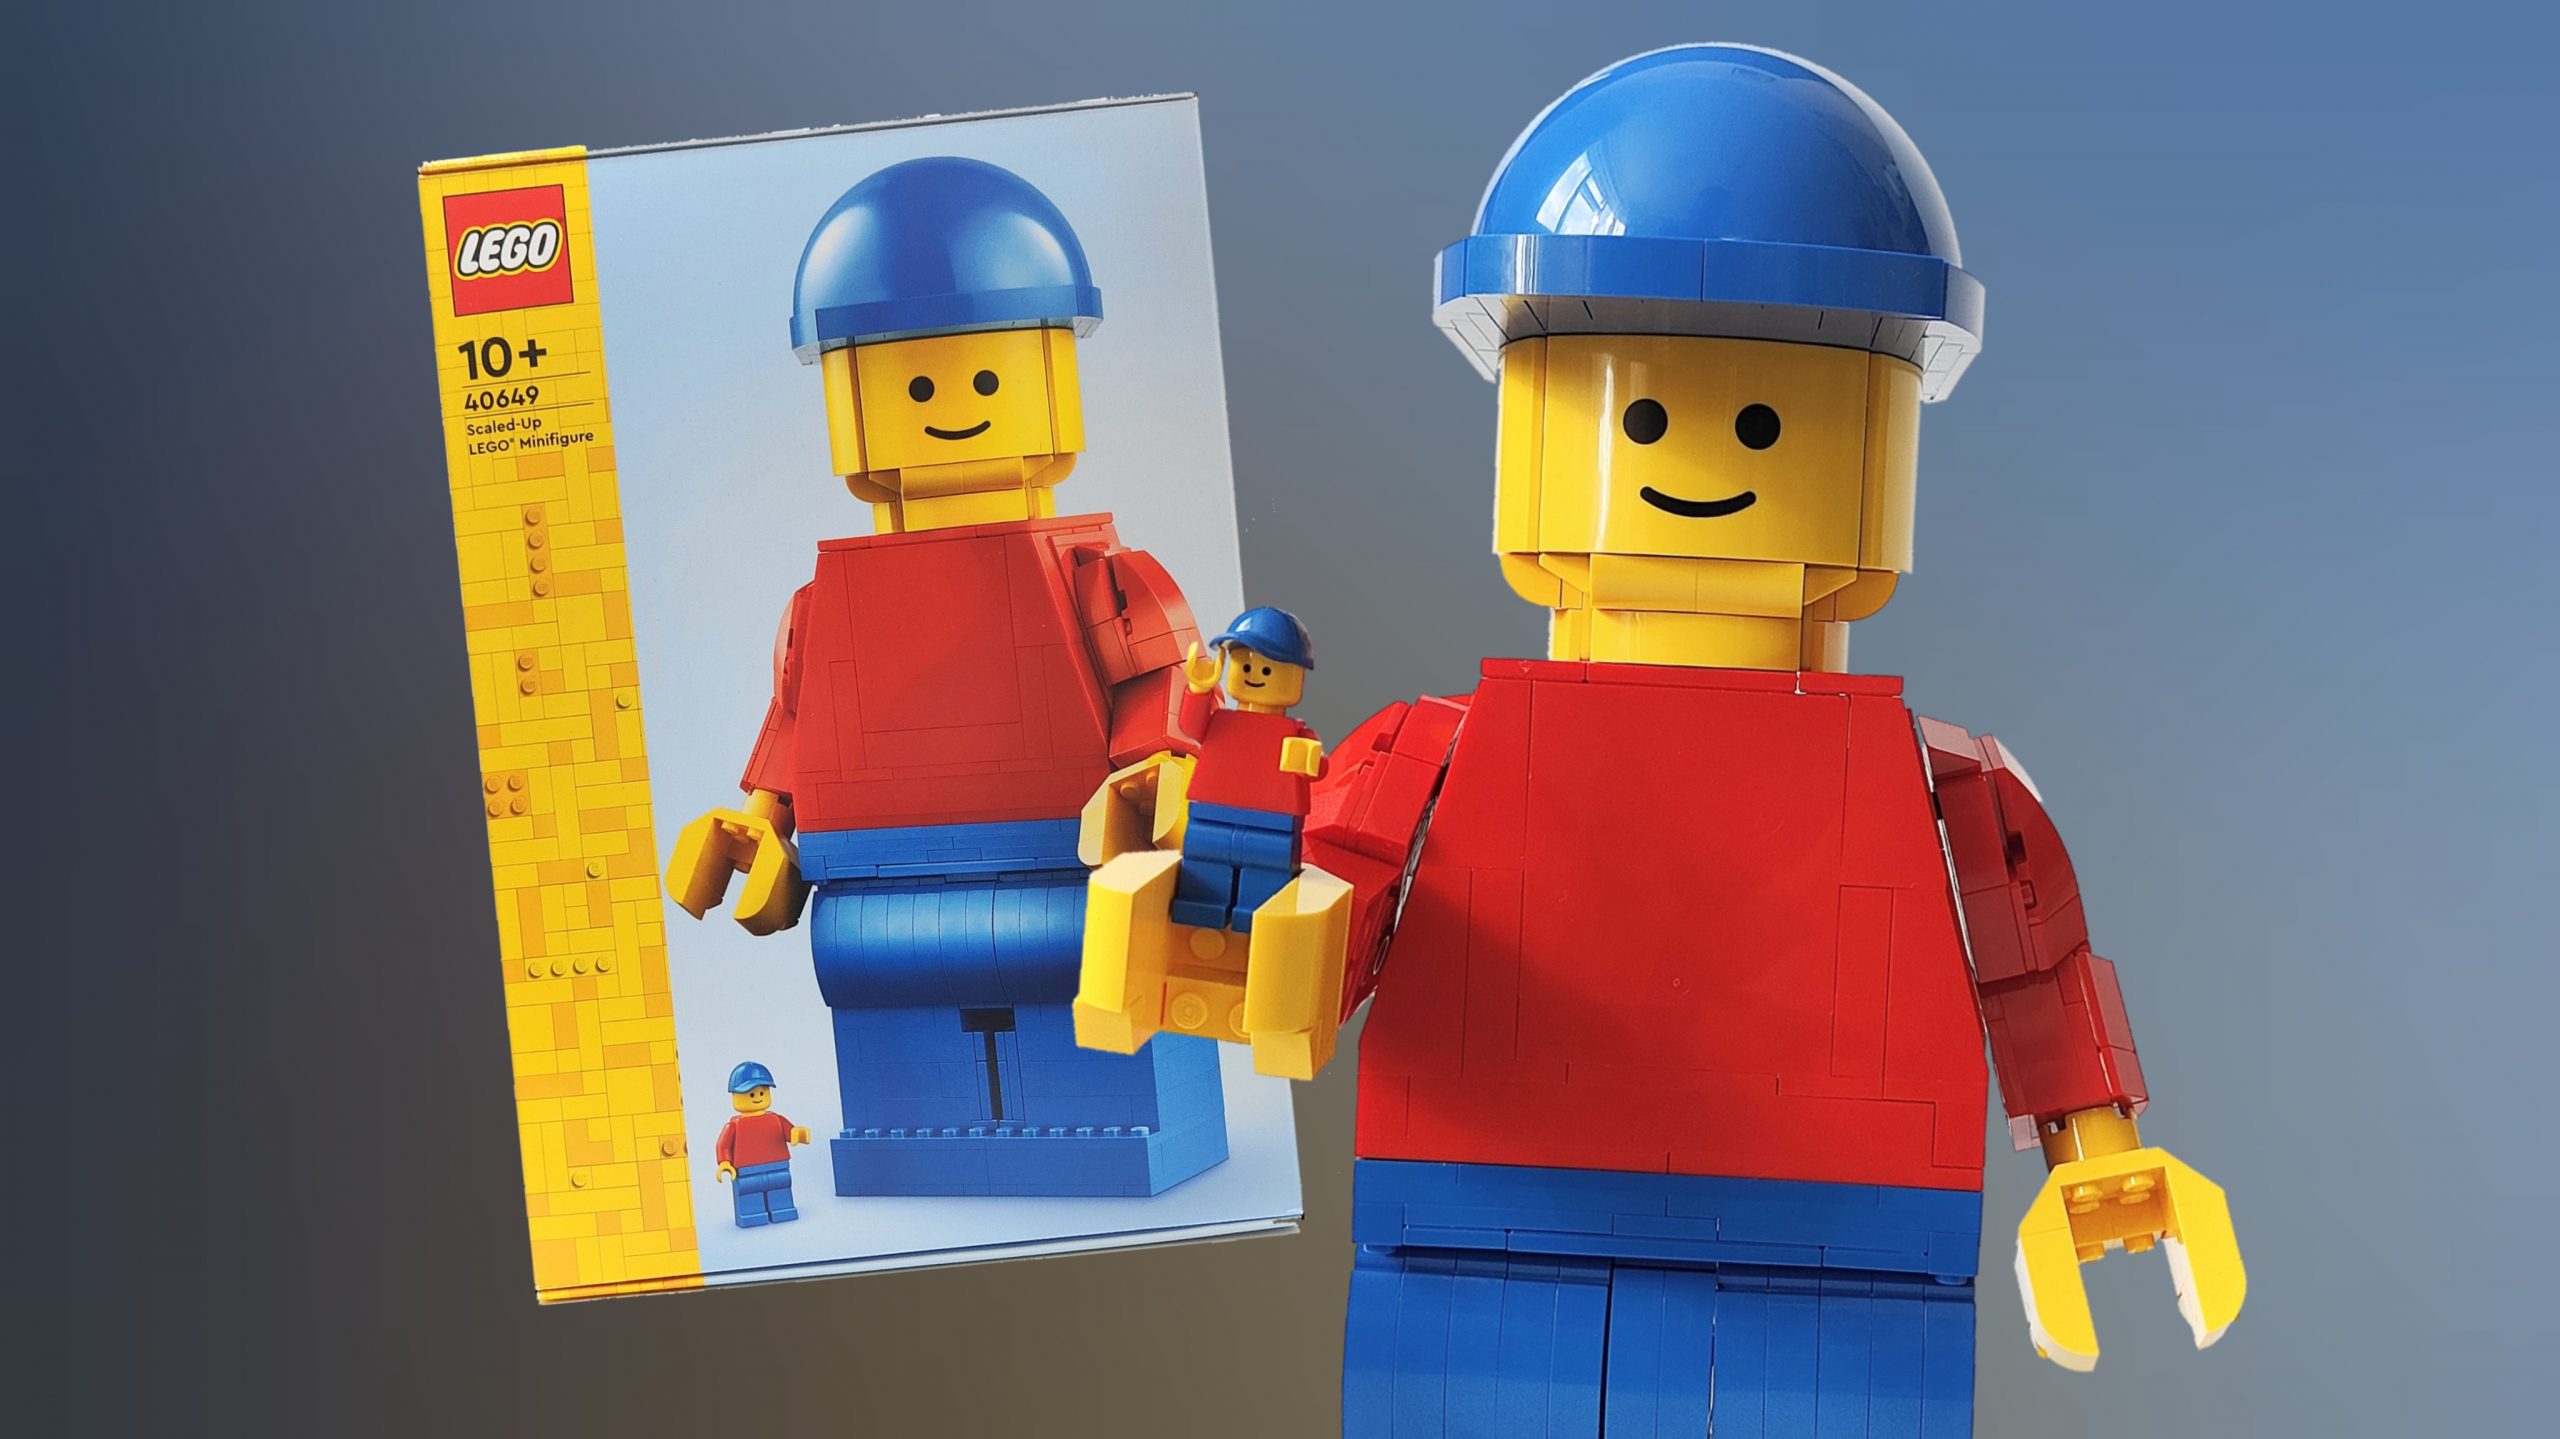 LEGO Scaled-Up LEGO Minifigure (40649) Review – The Brick Post!